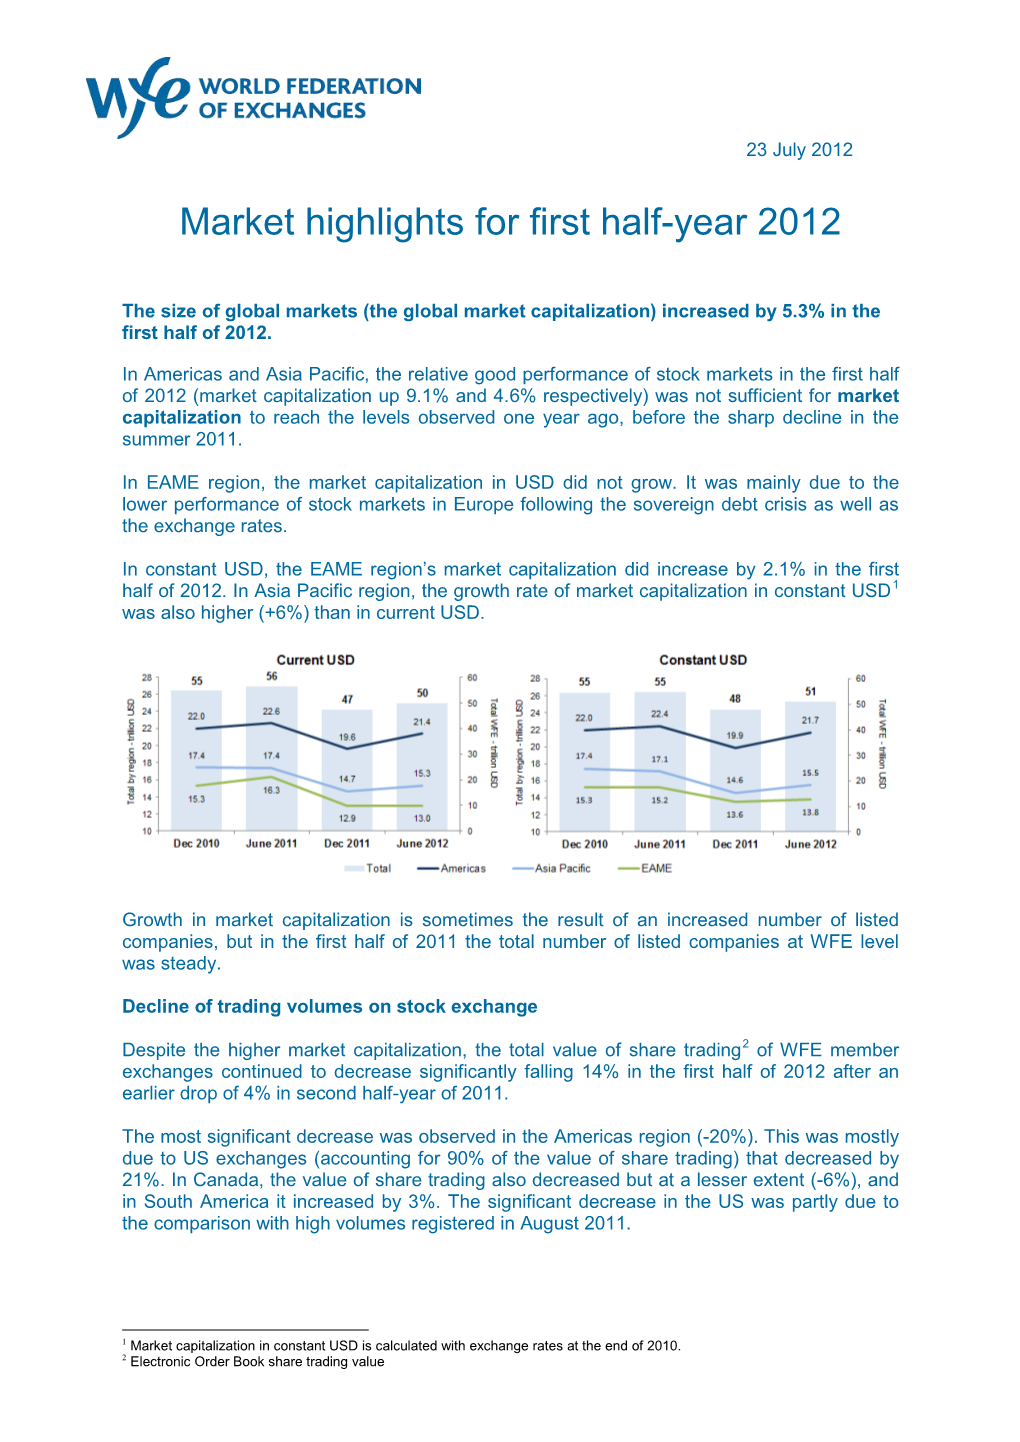 Market Highlights for First Half-Year 2012